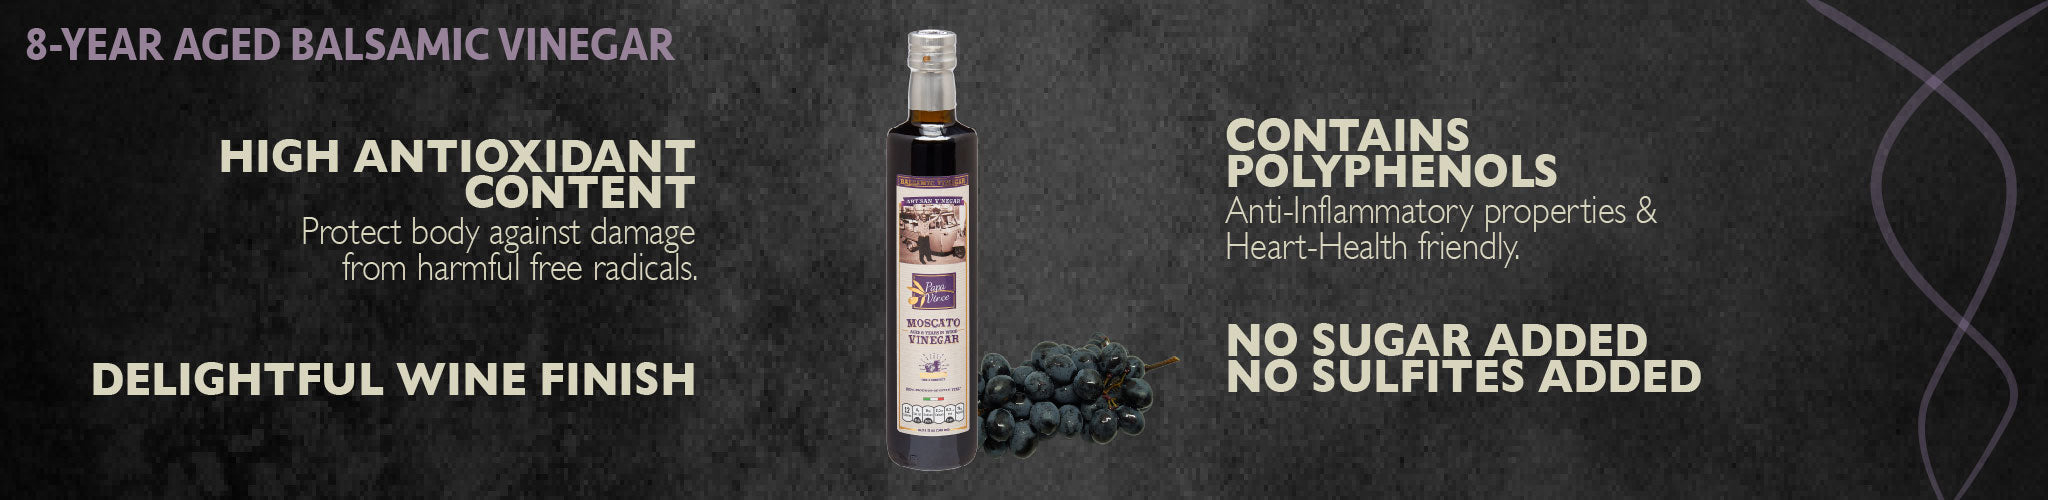 Papa Vince Aged Balsamic Vinegar - No Sugar, No Sulfites Added, No Pesticides. Made from freshly crushed whole grapes grown in Sicily, Italy, Minimally Processed, Delish subtle wine finish